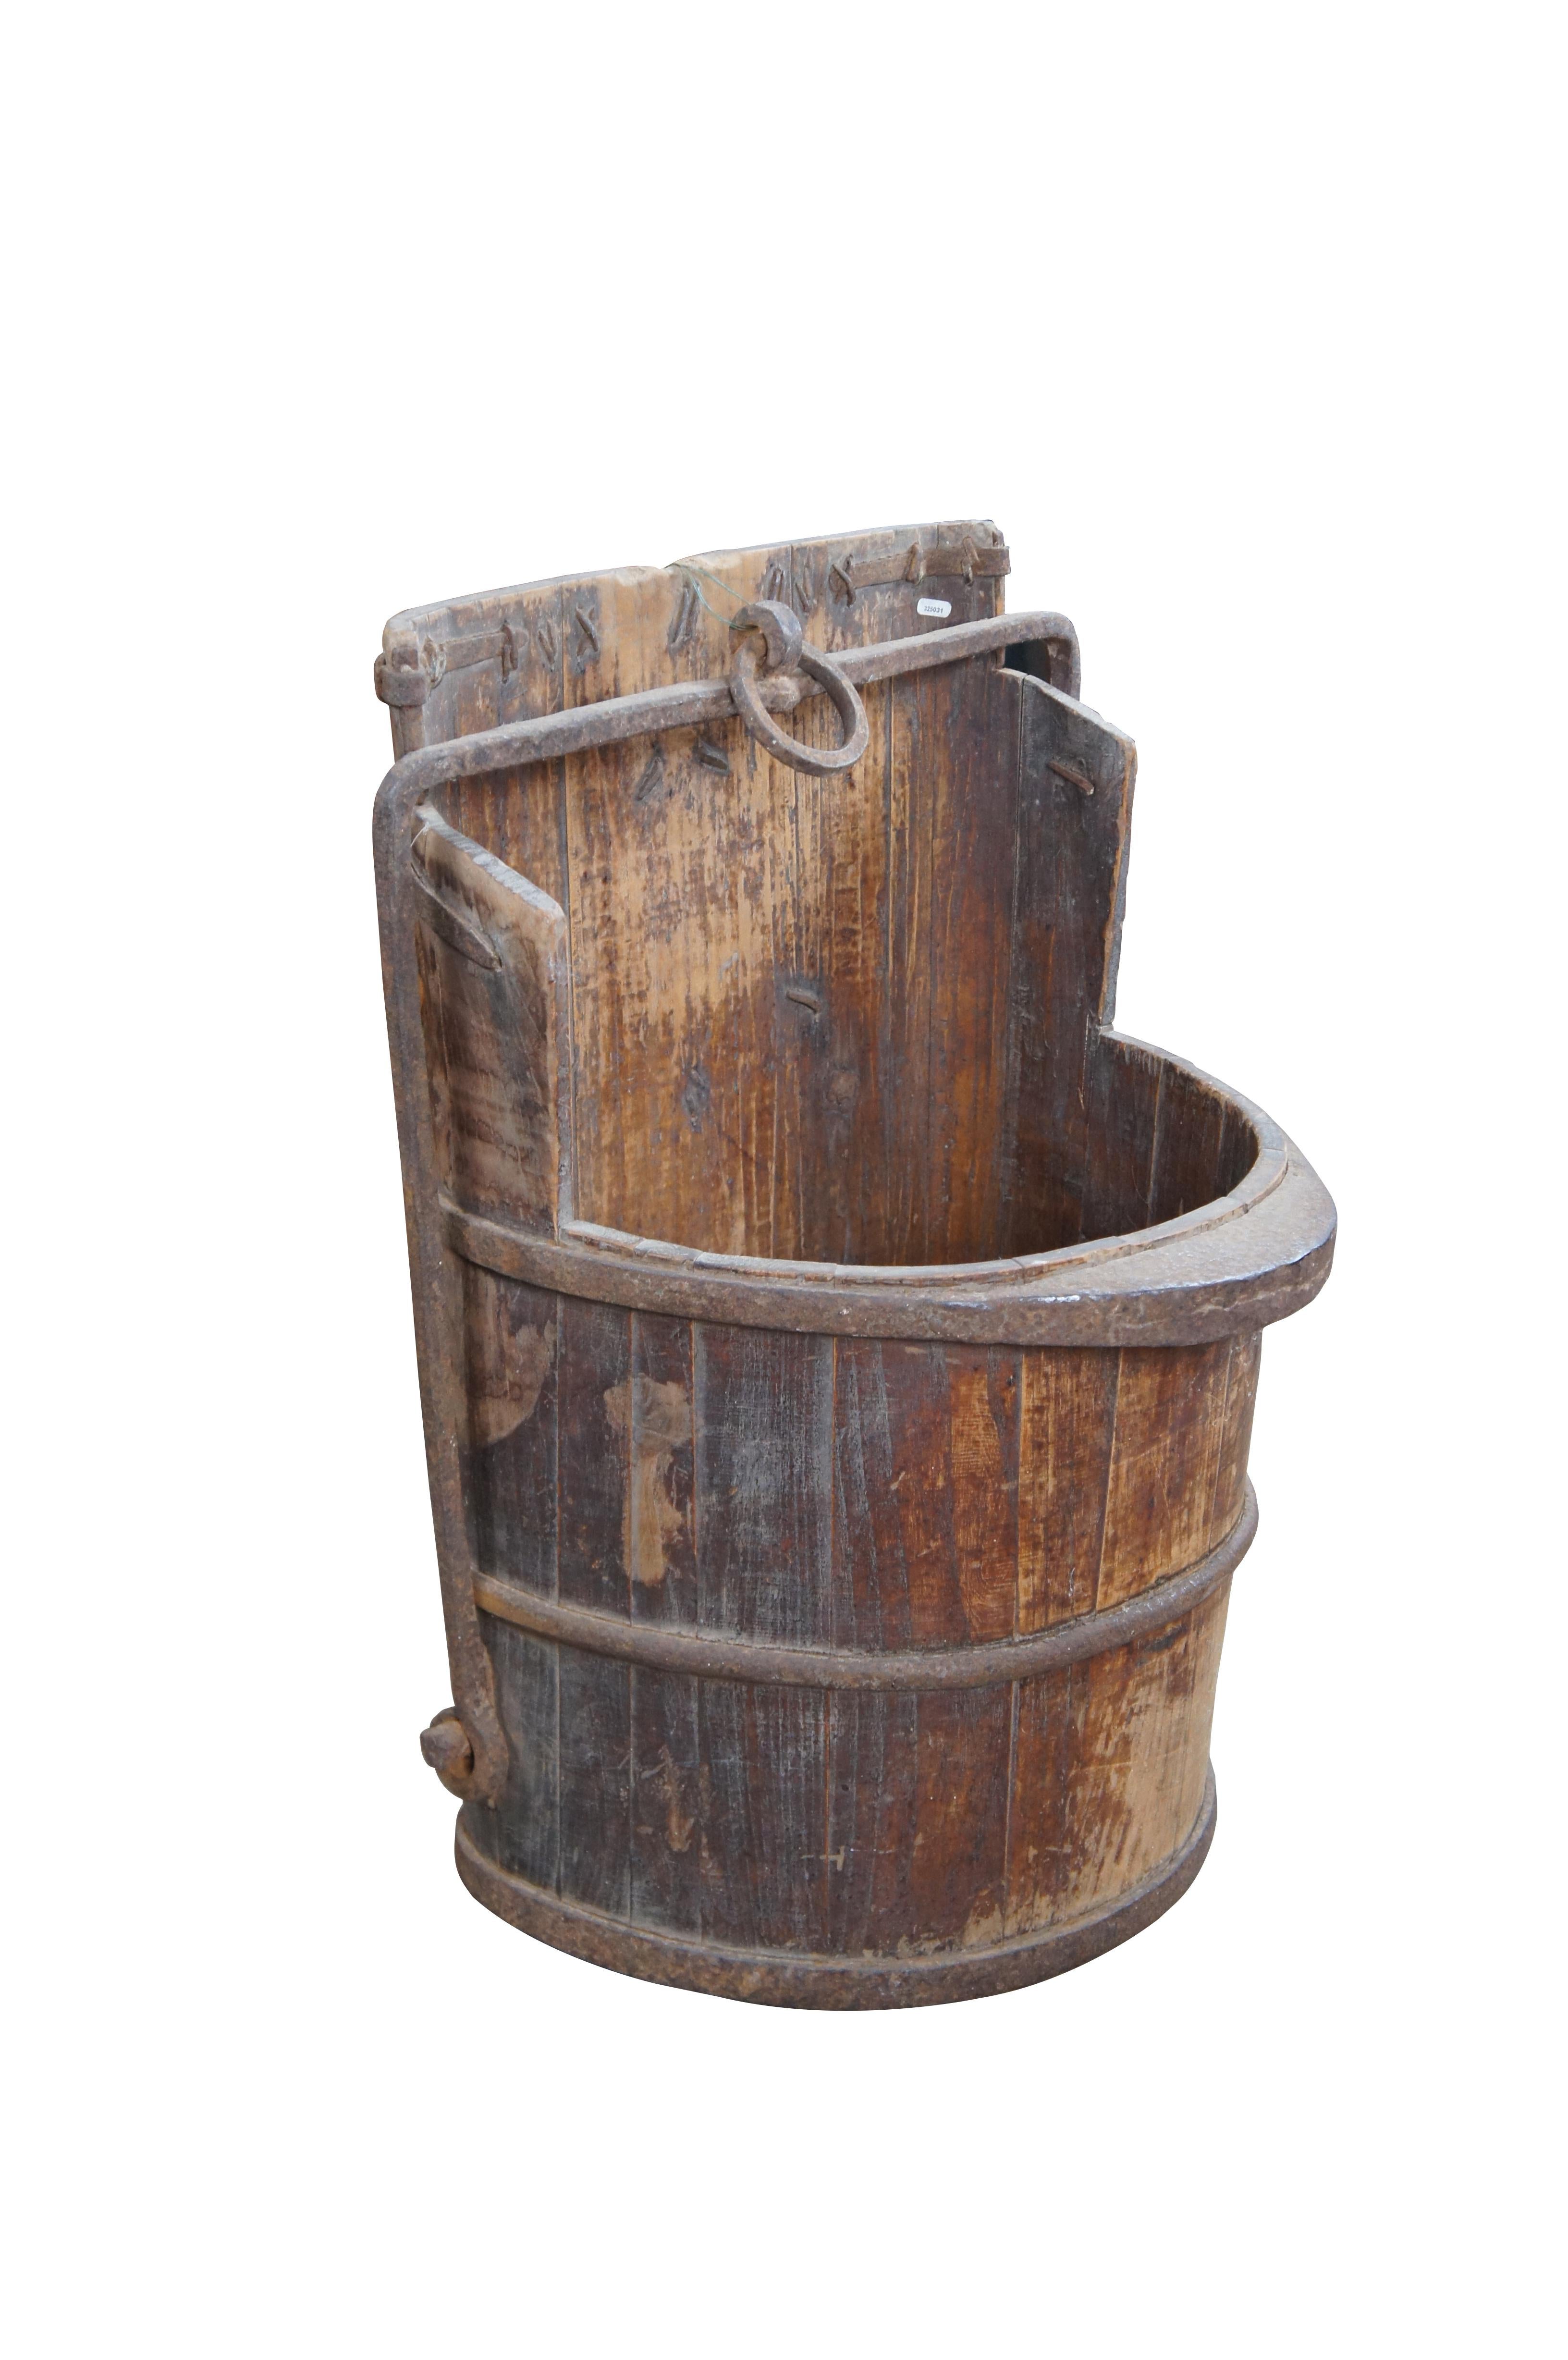 Primitive Chinese water bucket, circa 1890s-1910. Made elm and forged iron. Beautifully worn from years of use. A great decorative piece that could also be re-purposed as a planter, garbage can, cane or umbrella stand.

Dimensions:
26.5